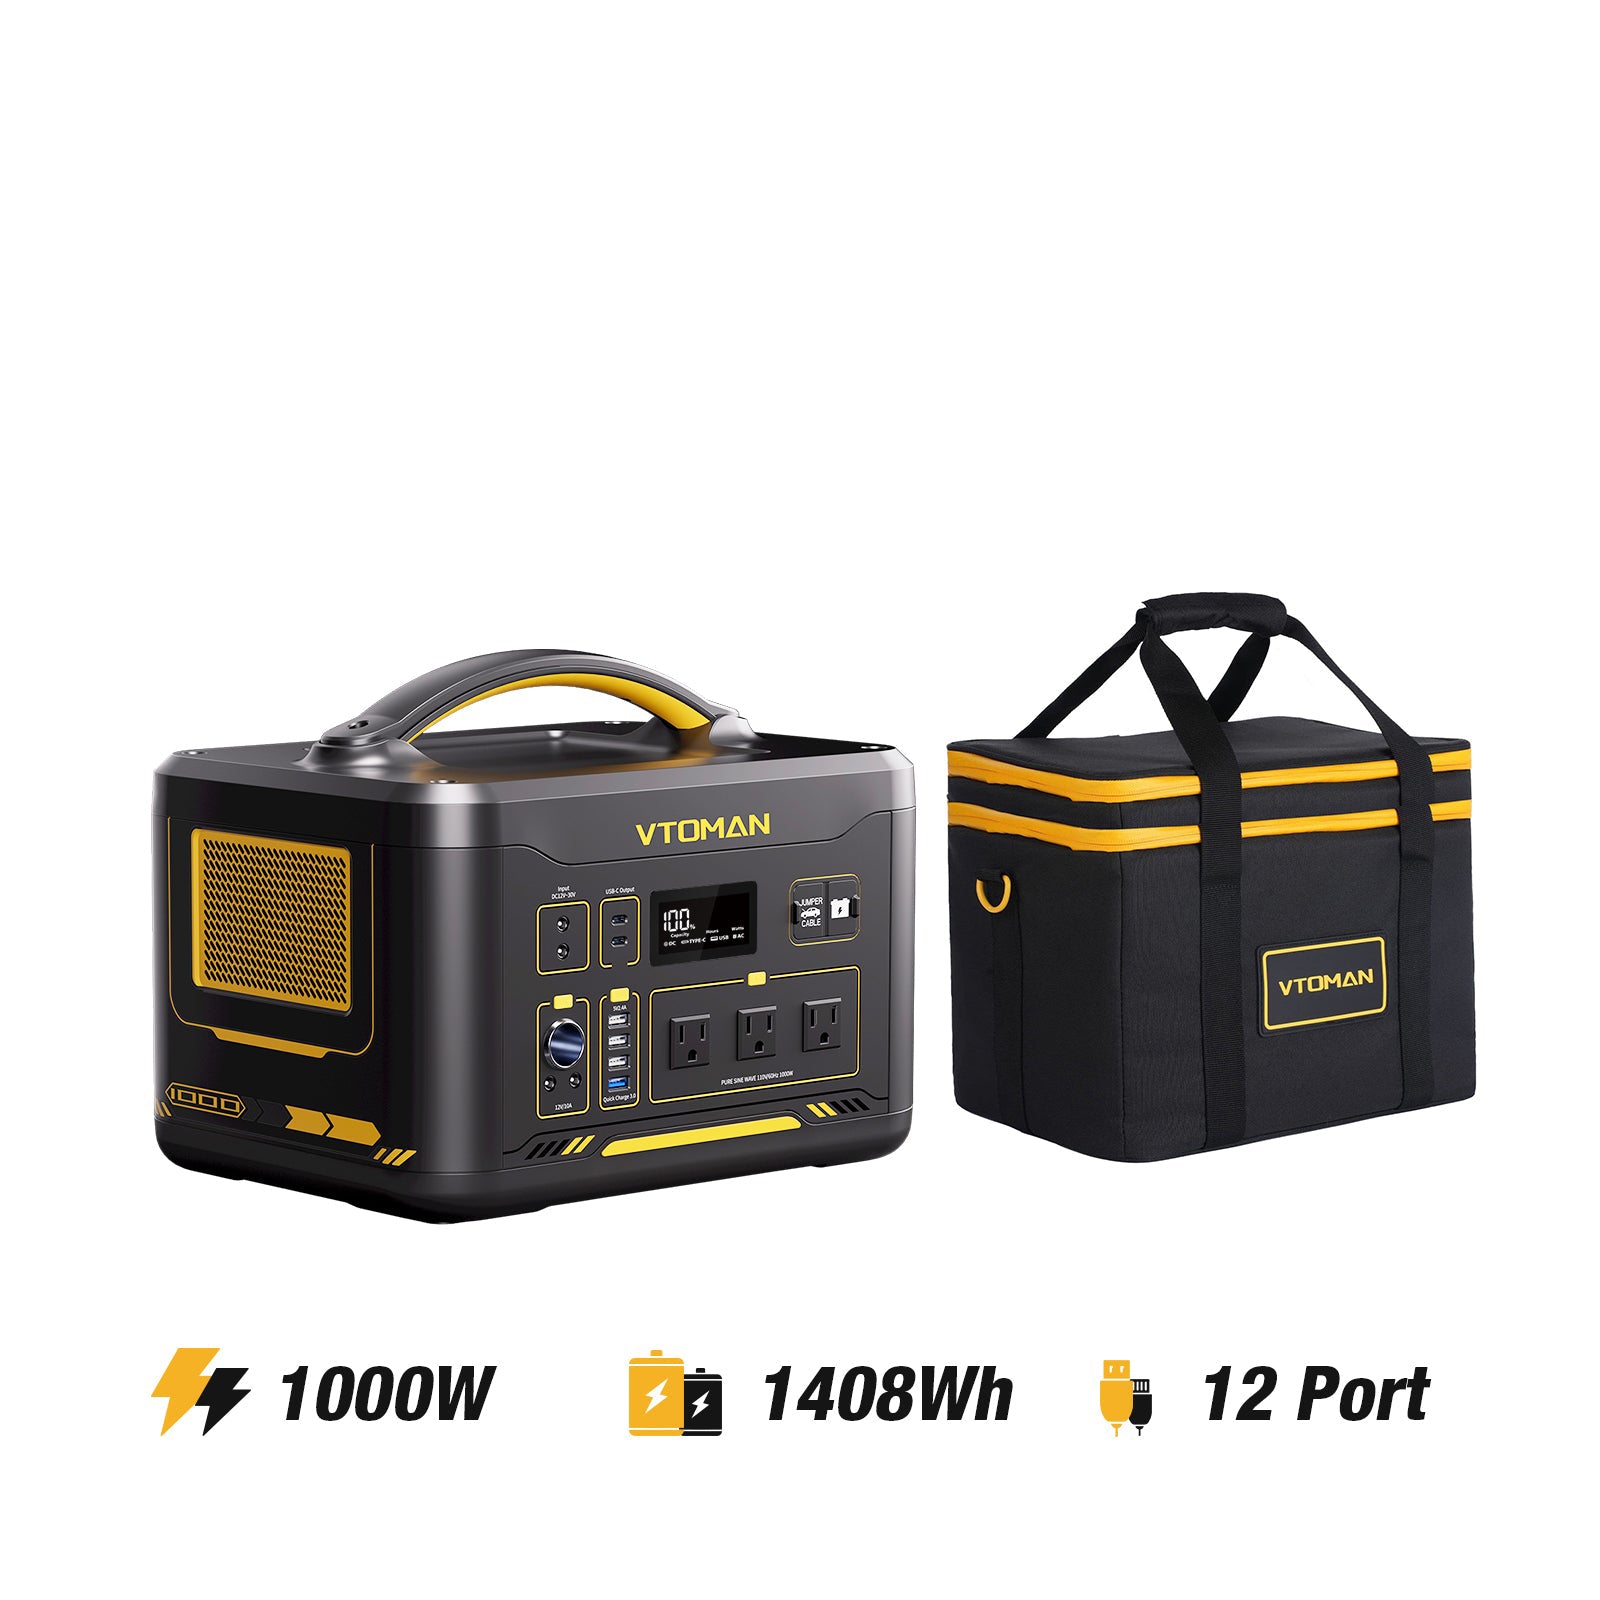 1000W Power Station | 1408Wh Capacity | Ultimate Energy